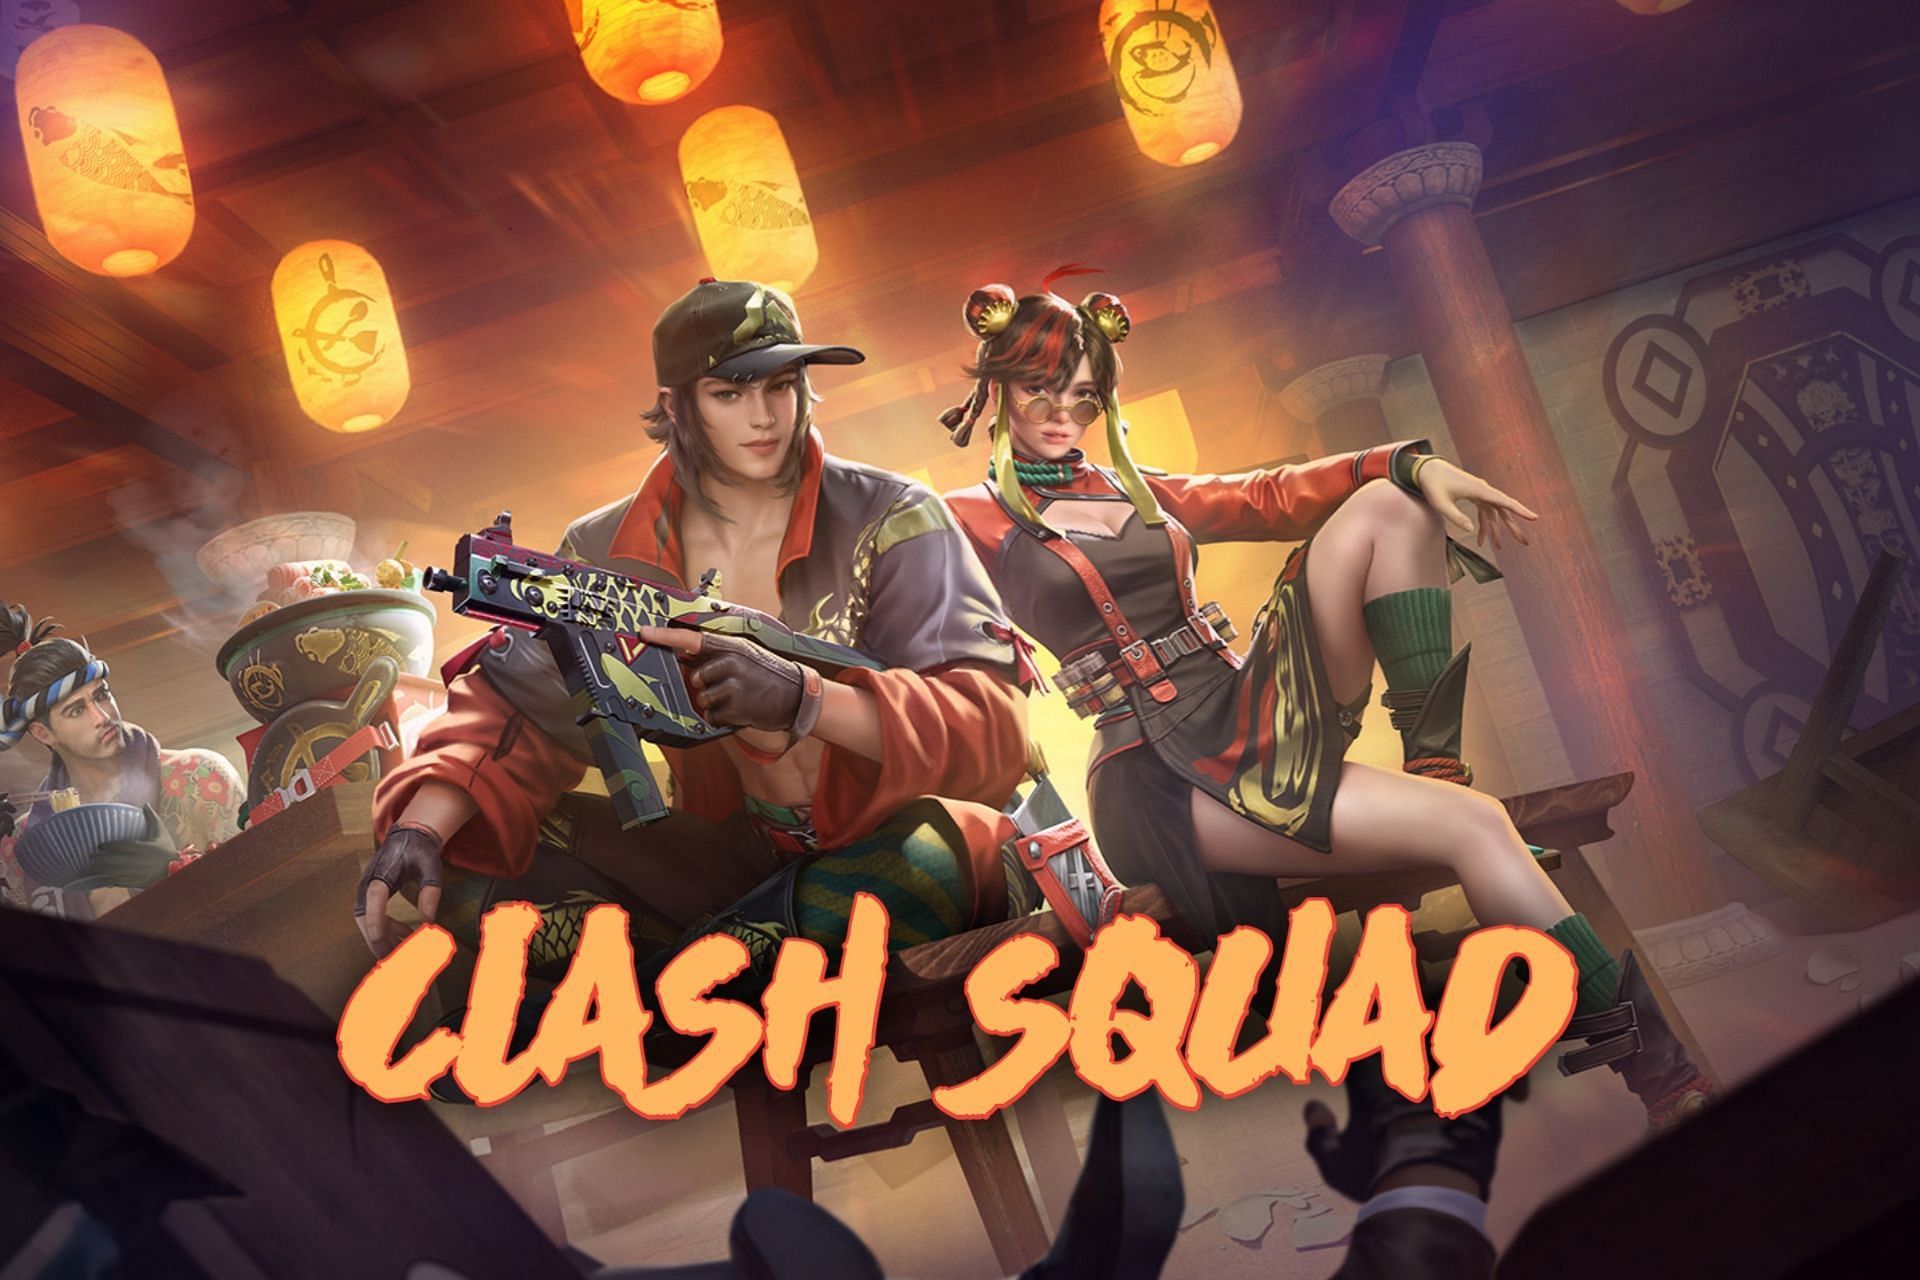 Free Fire MAX Guide: Wins Your Clash Squad Games on Bermuda MAX